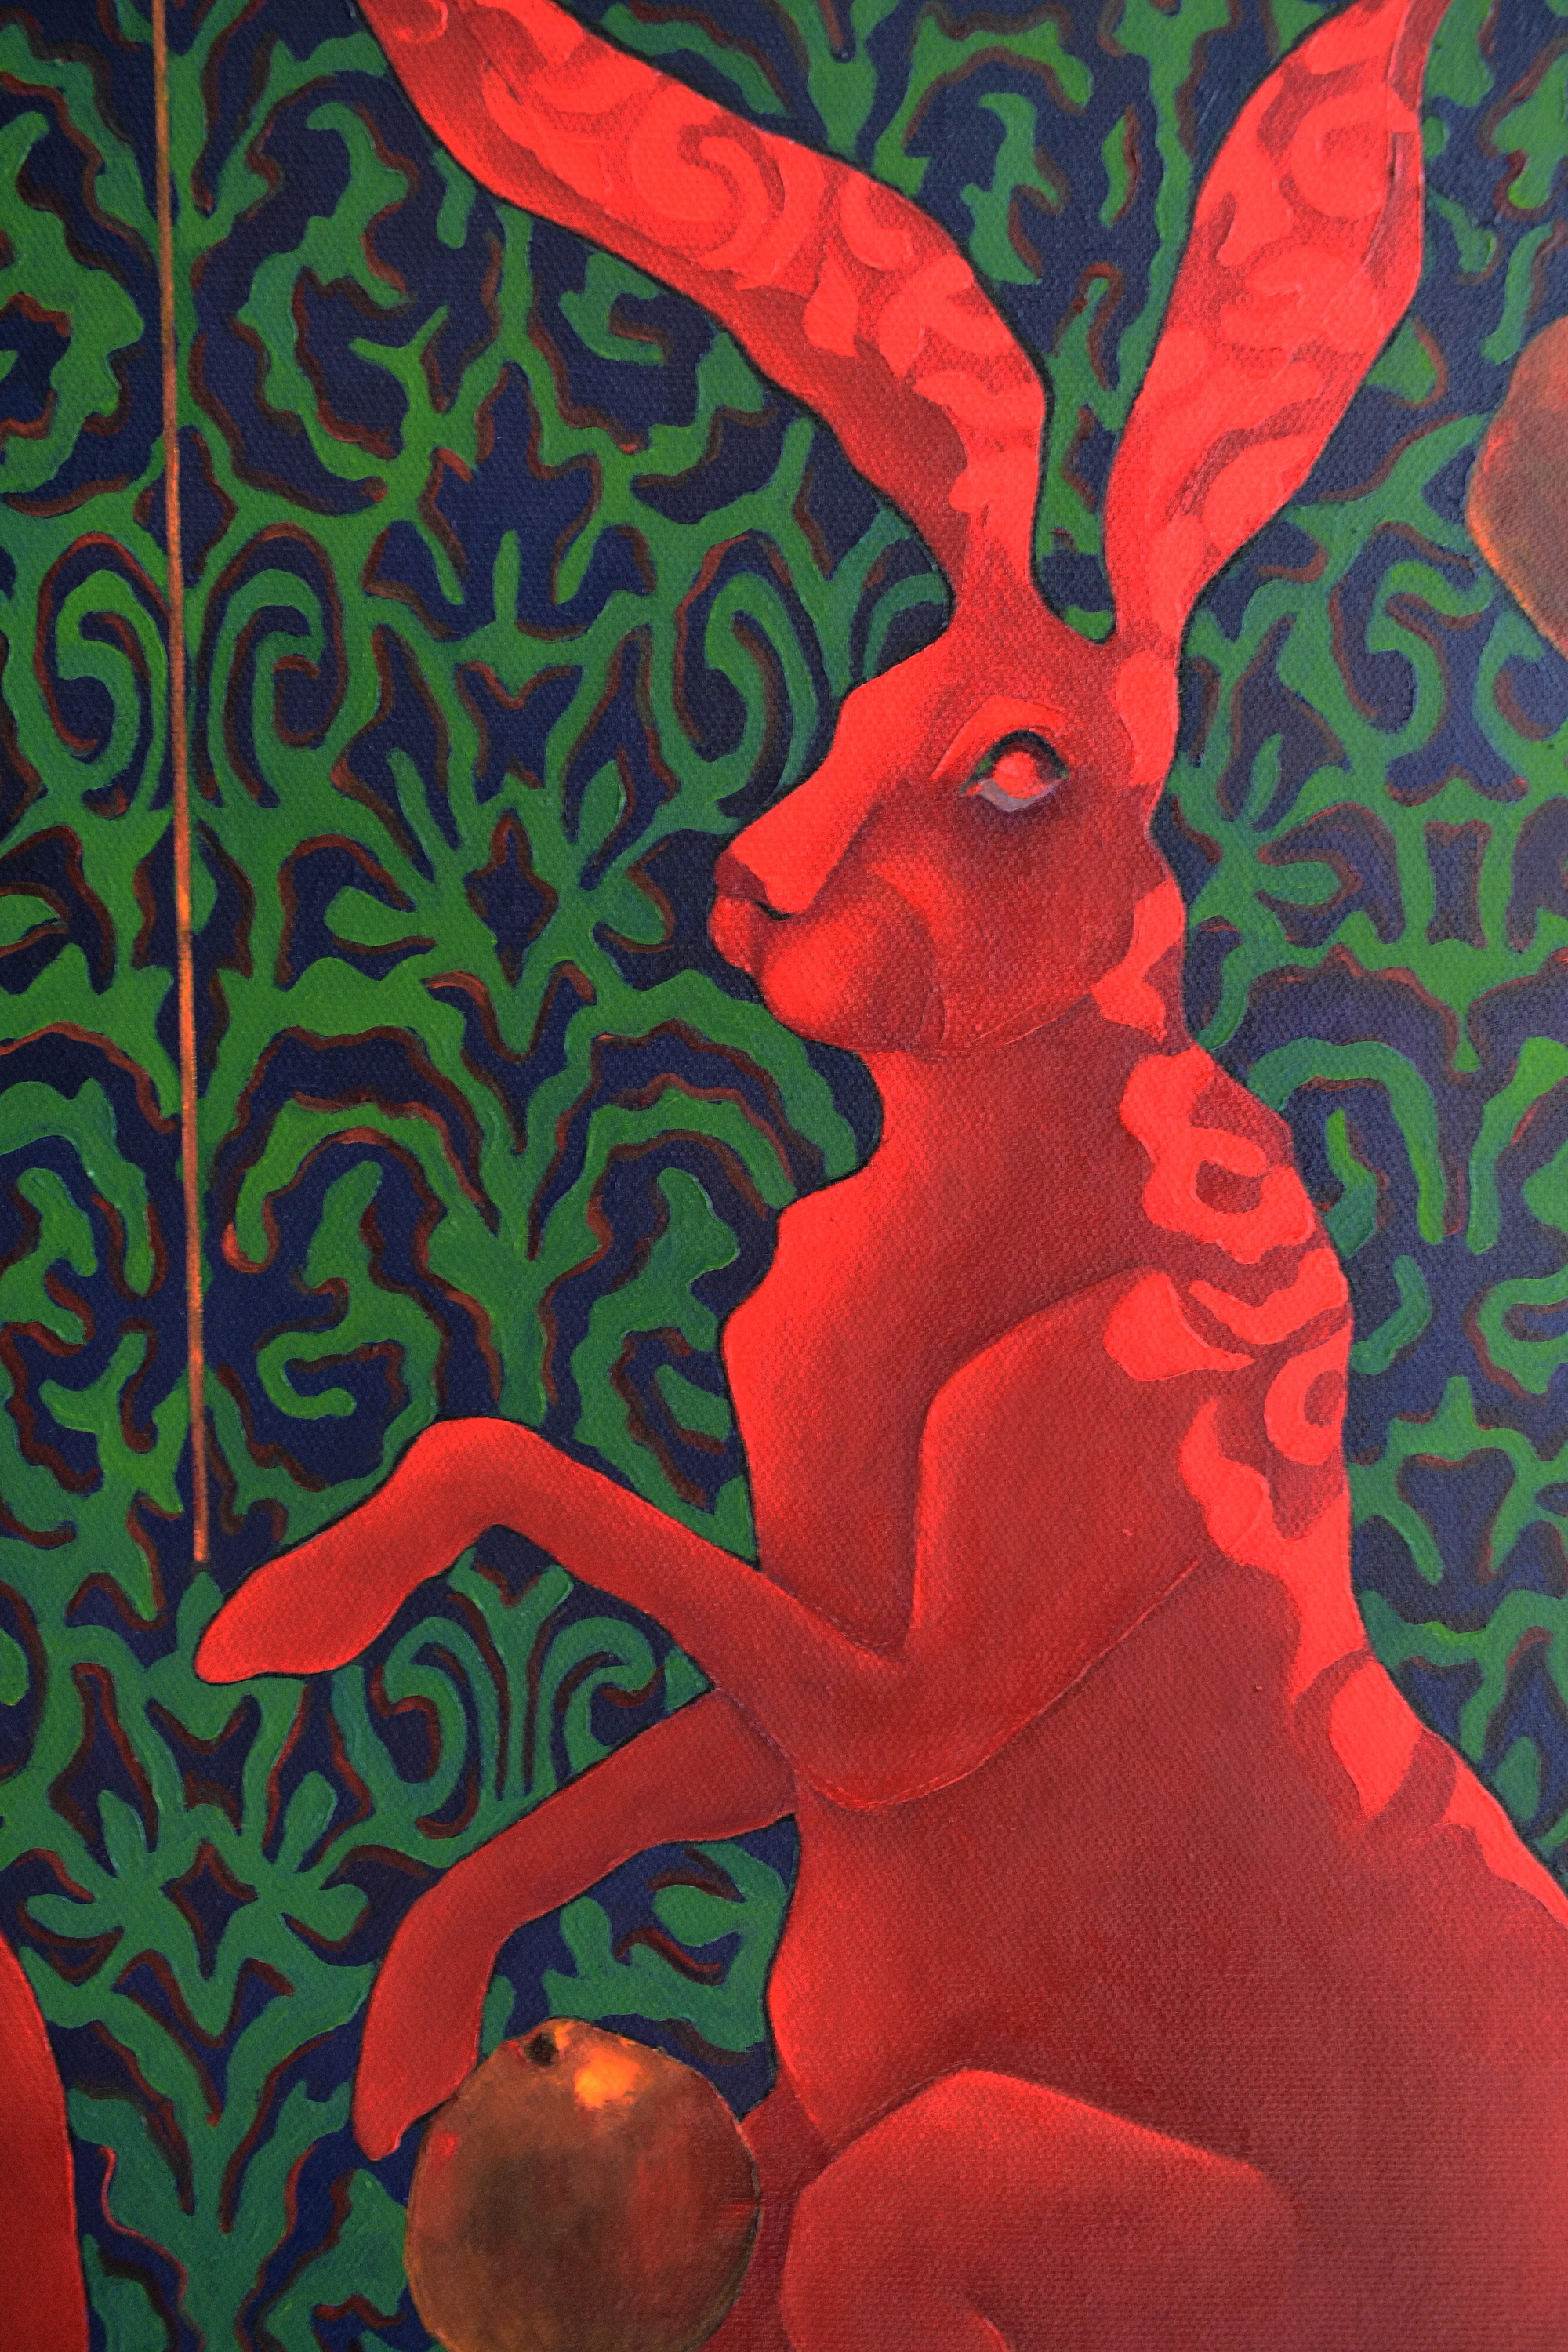 Painting by Marina Venediktova Red rabbits collect golden apples detail